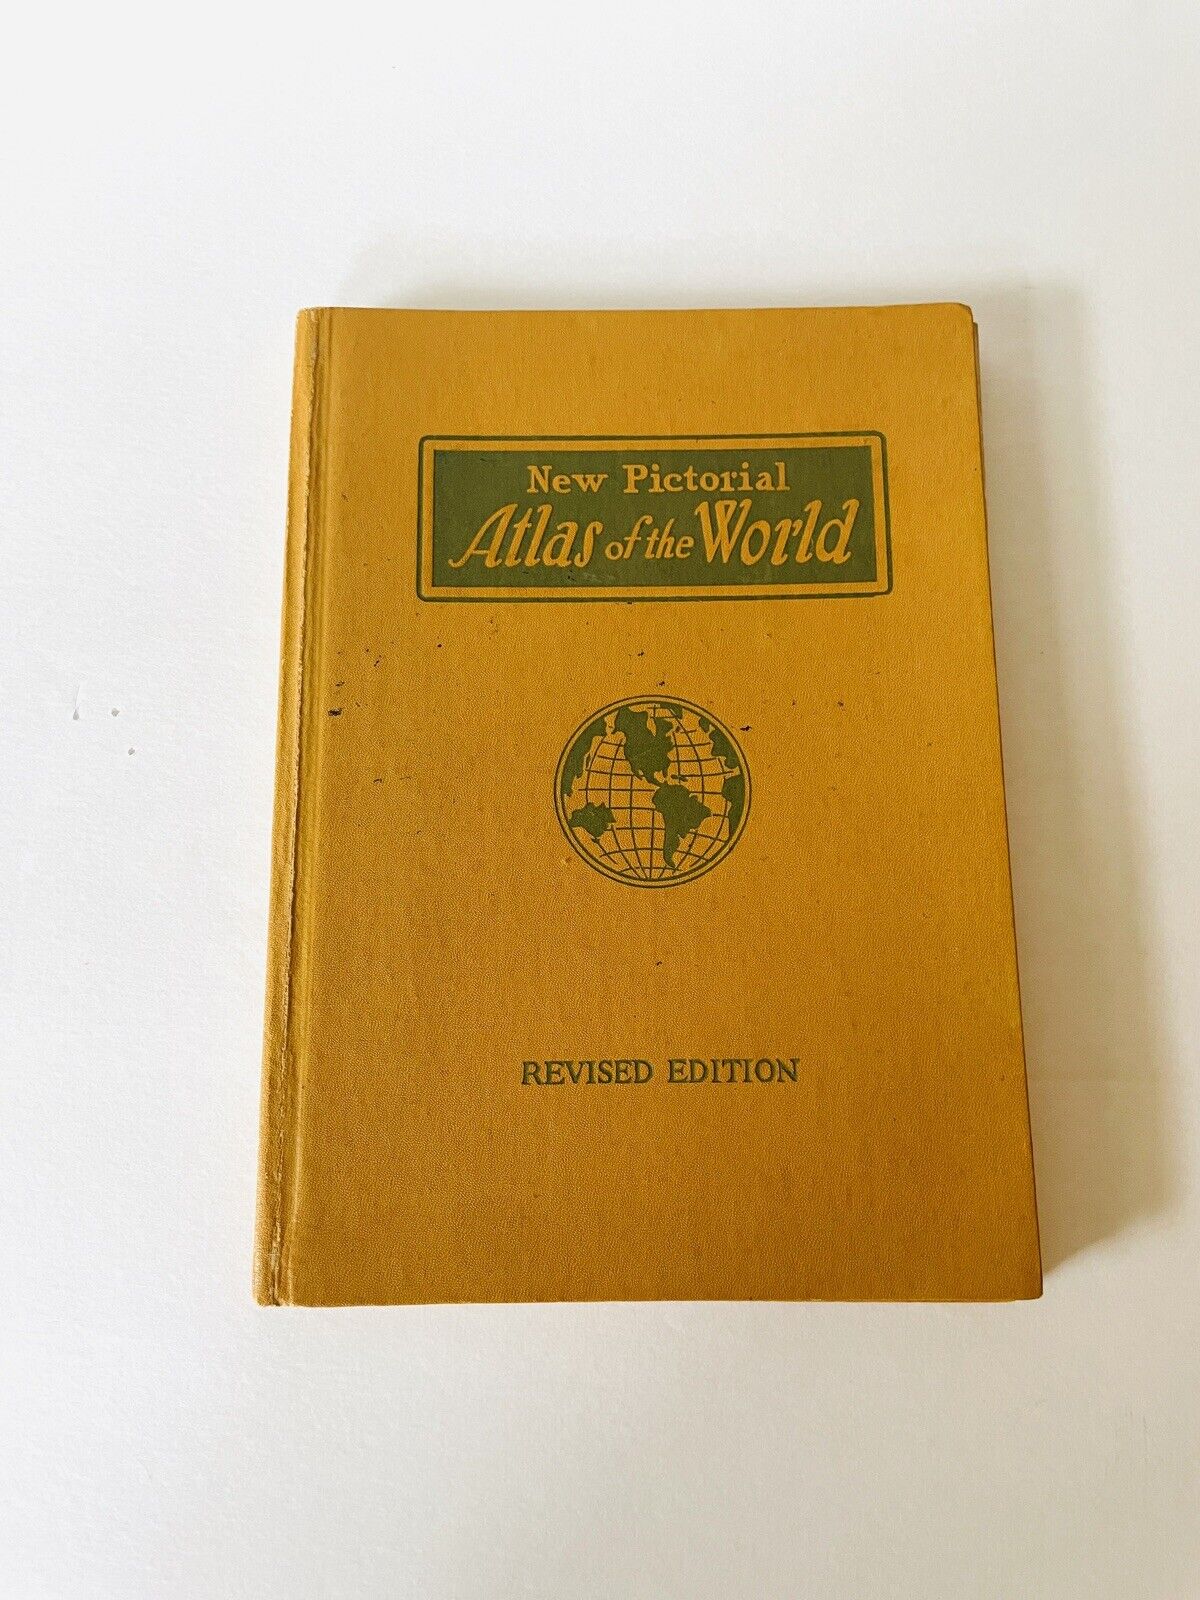 New Pictorial Atlas of the World Revised Edition 1954